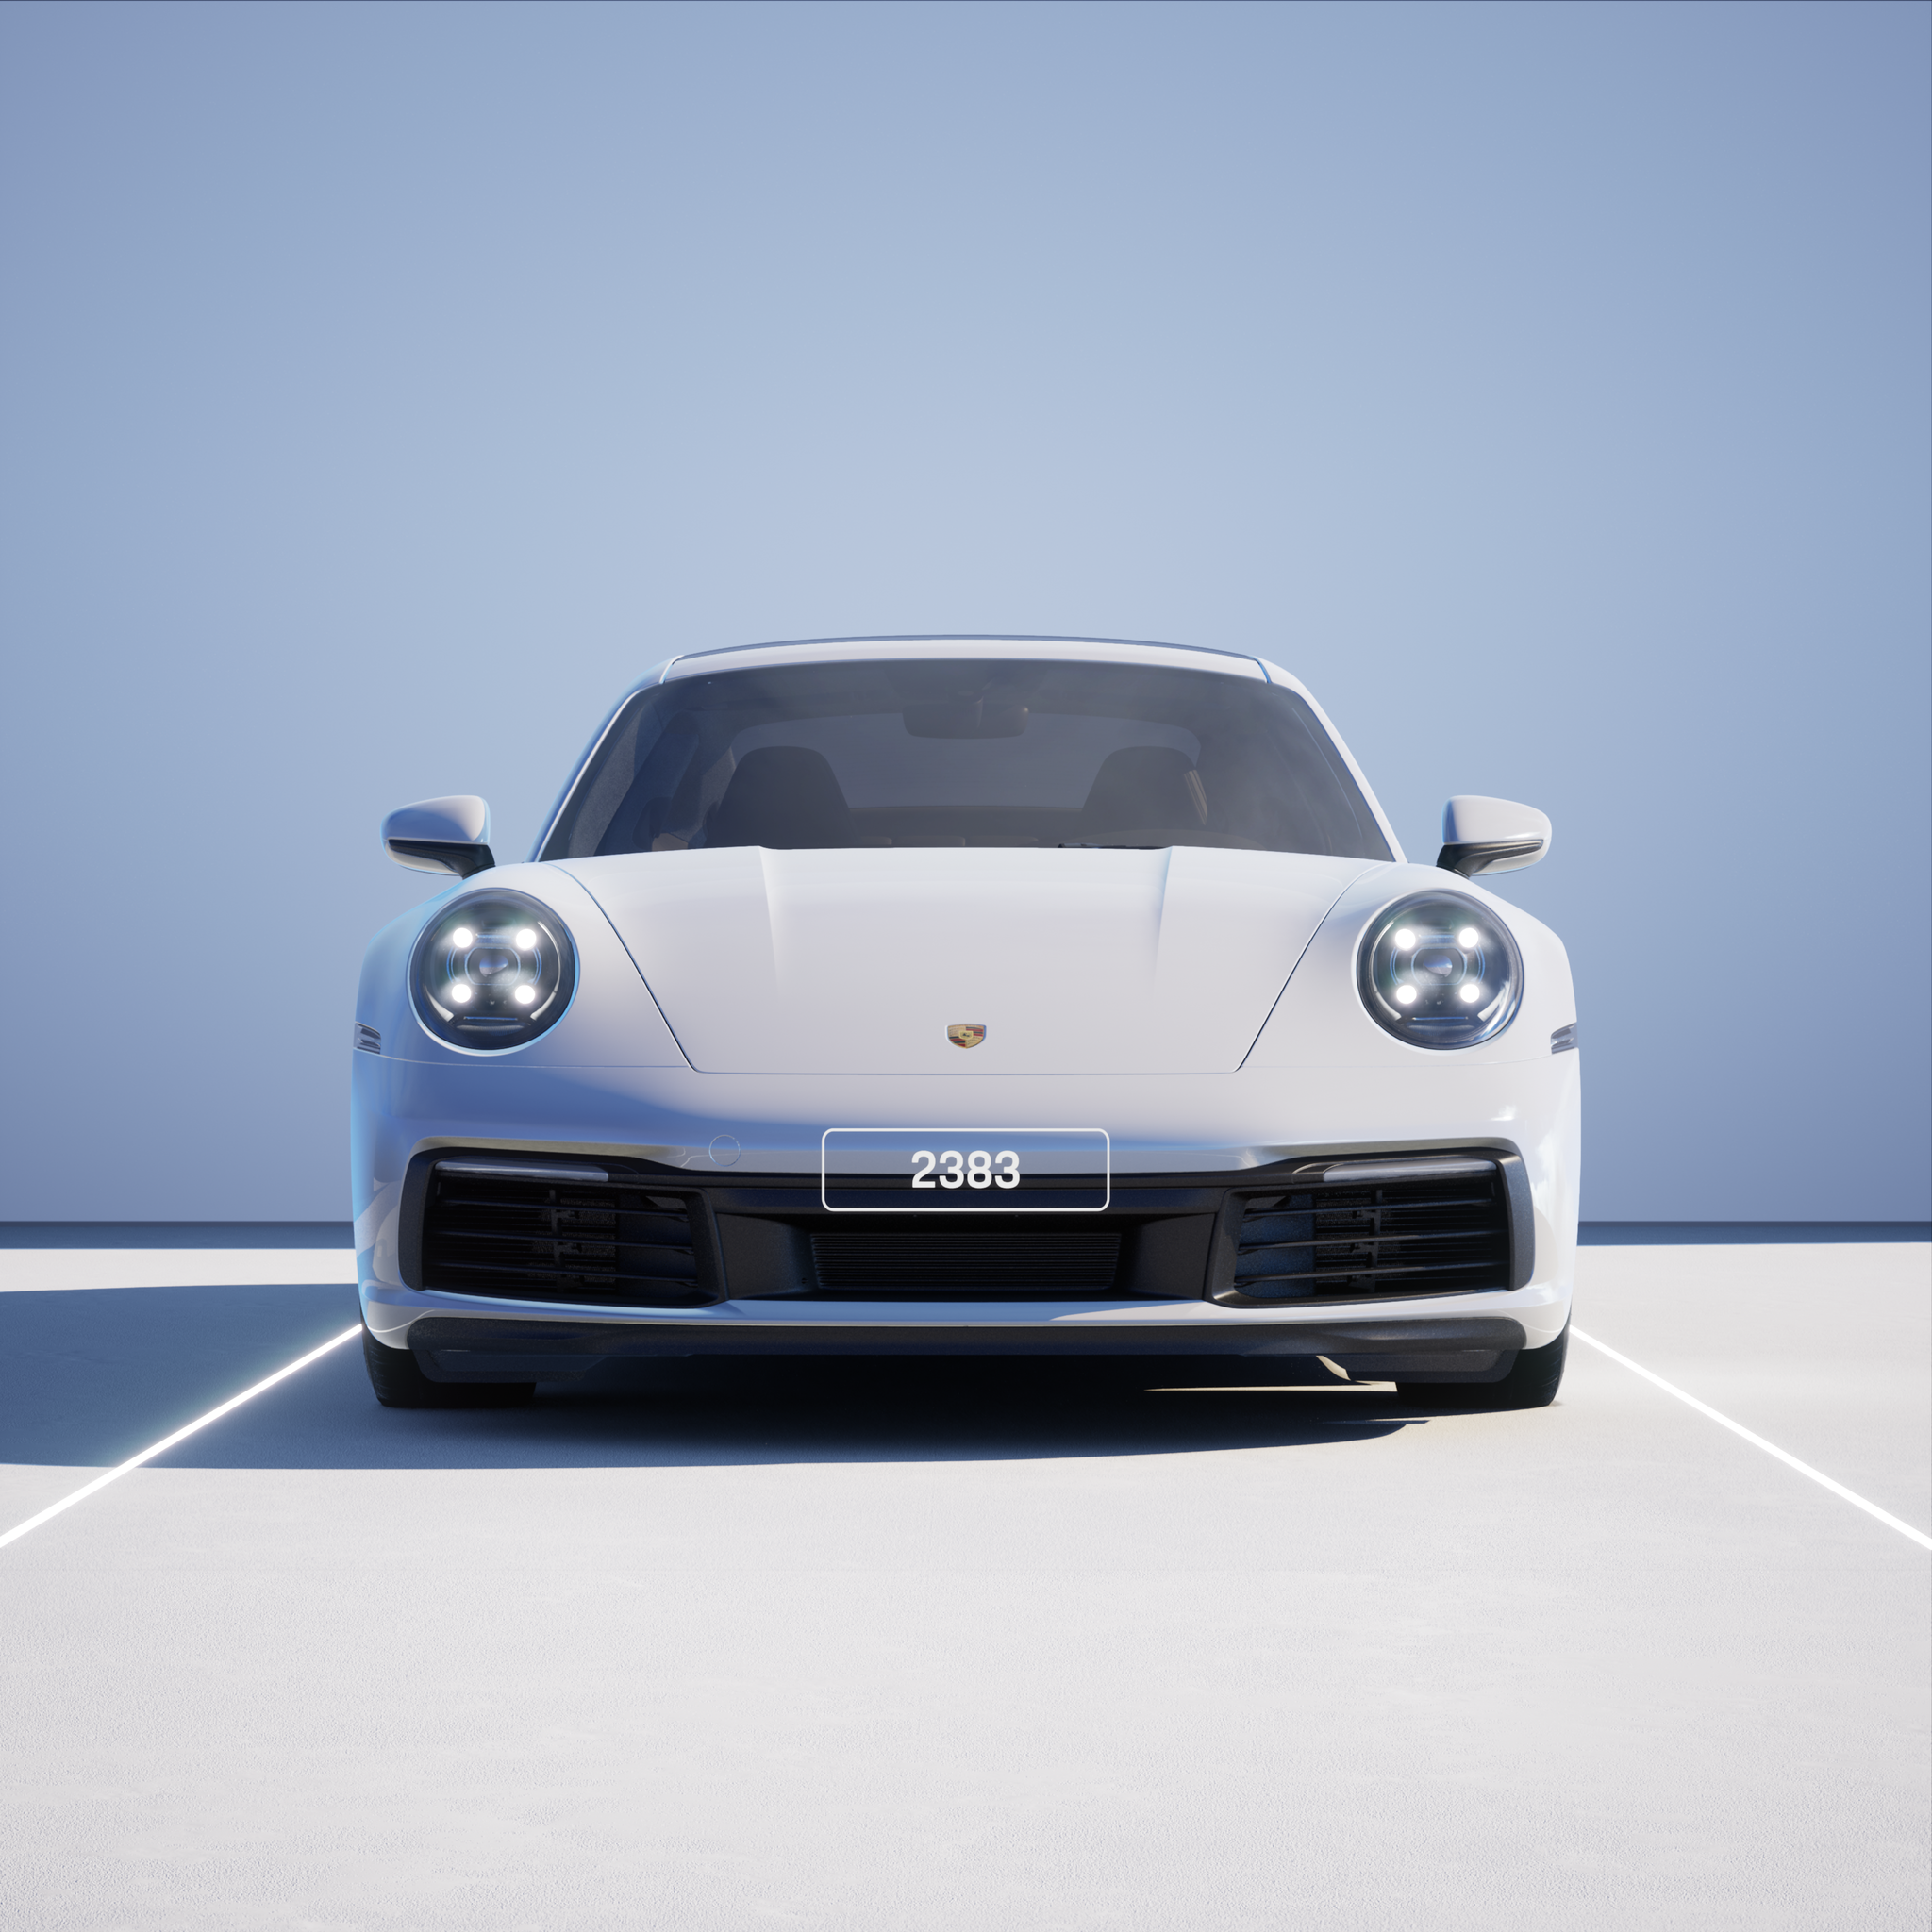 The PORSCHΞ 911 2383 image in phase